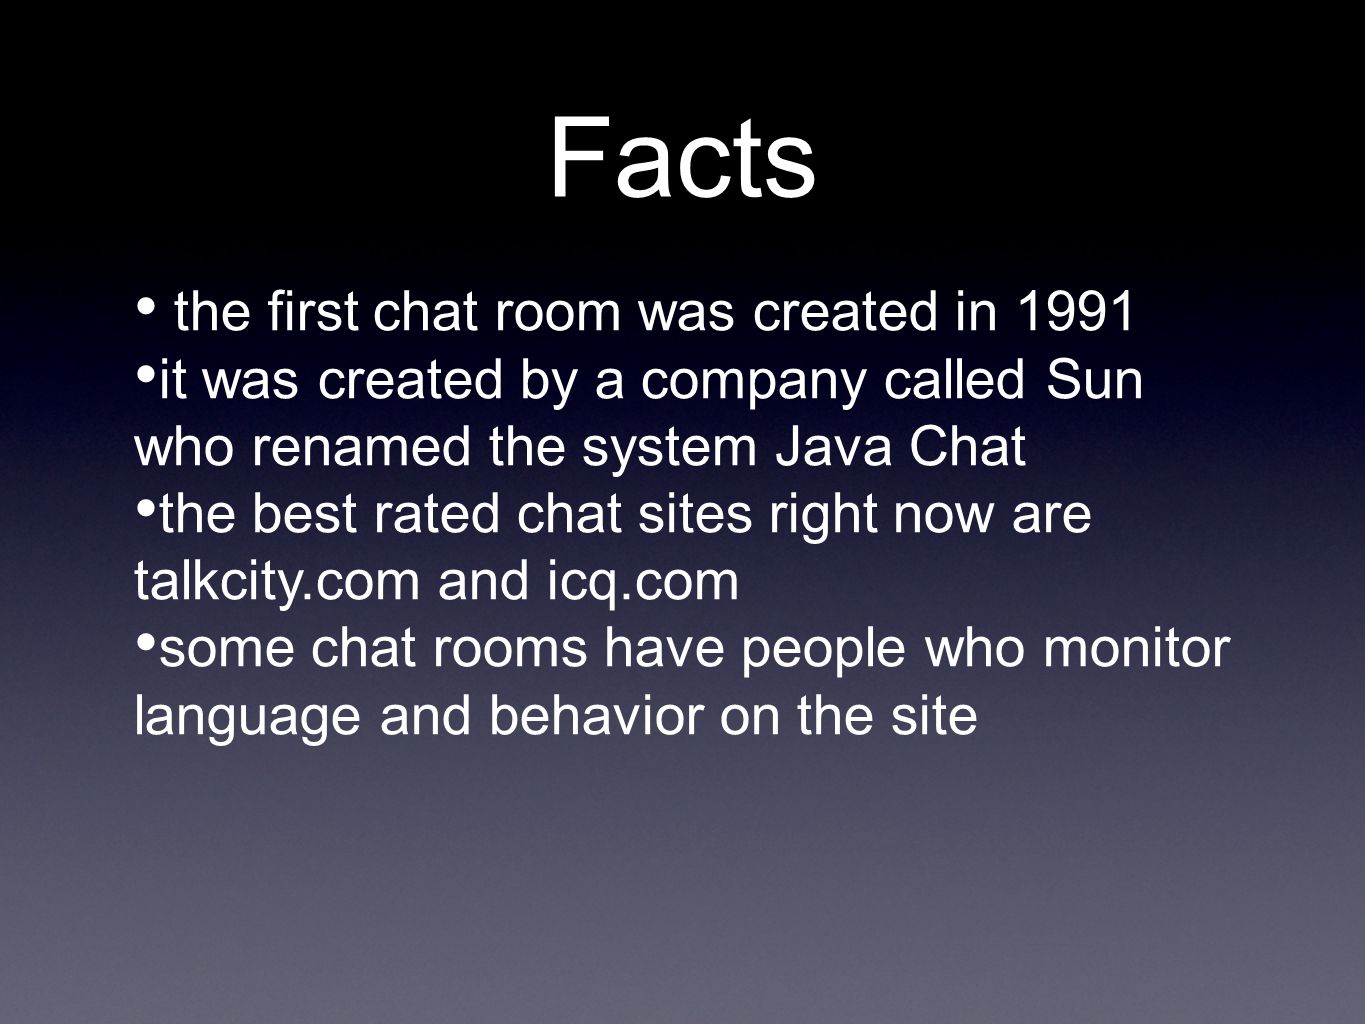 Facts the first chat room was created in 1991 it was created by a company called Sun who renamed the system Java Chat the best rated chat sites right now are talkcity.com and icq.com some chat rooms have people who monitor language and behavior on the site